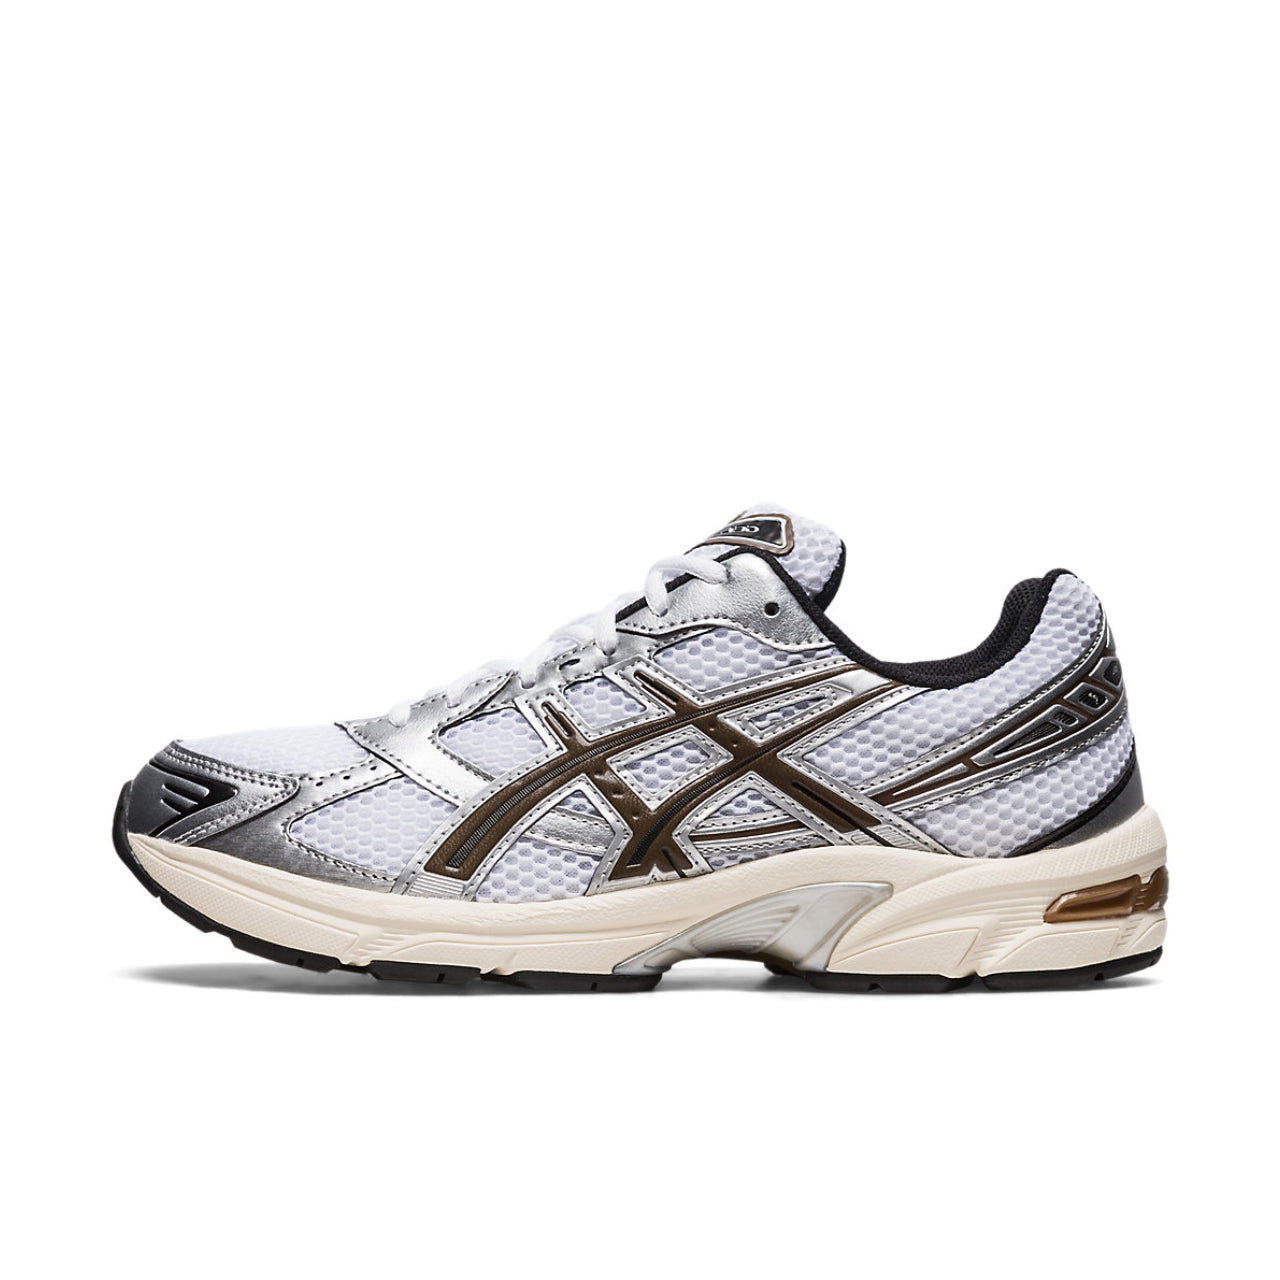 ASICS Gel-1130 White Clay Canyon - 1201A256-113 - Left